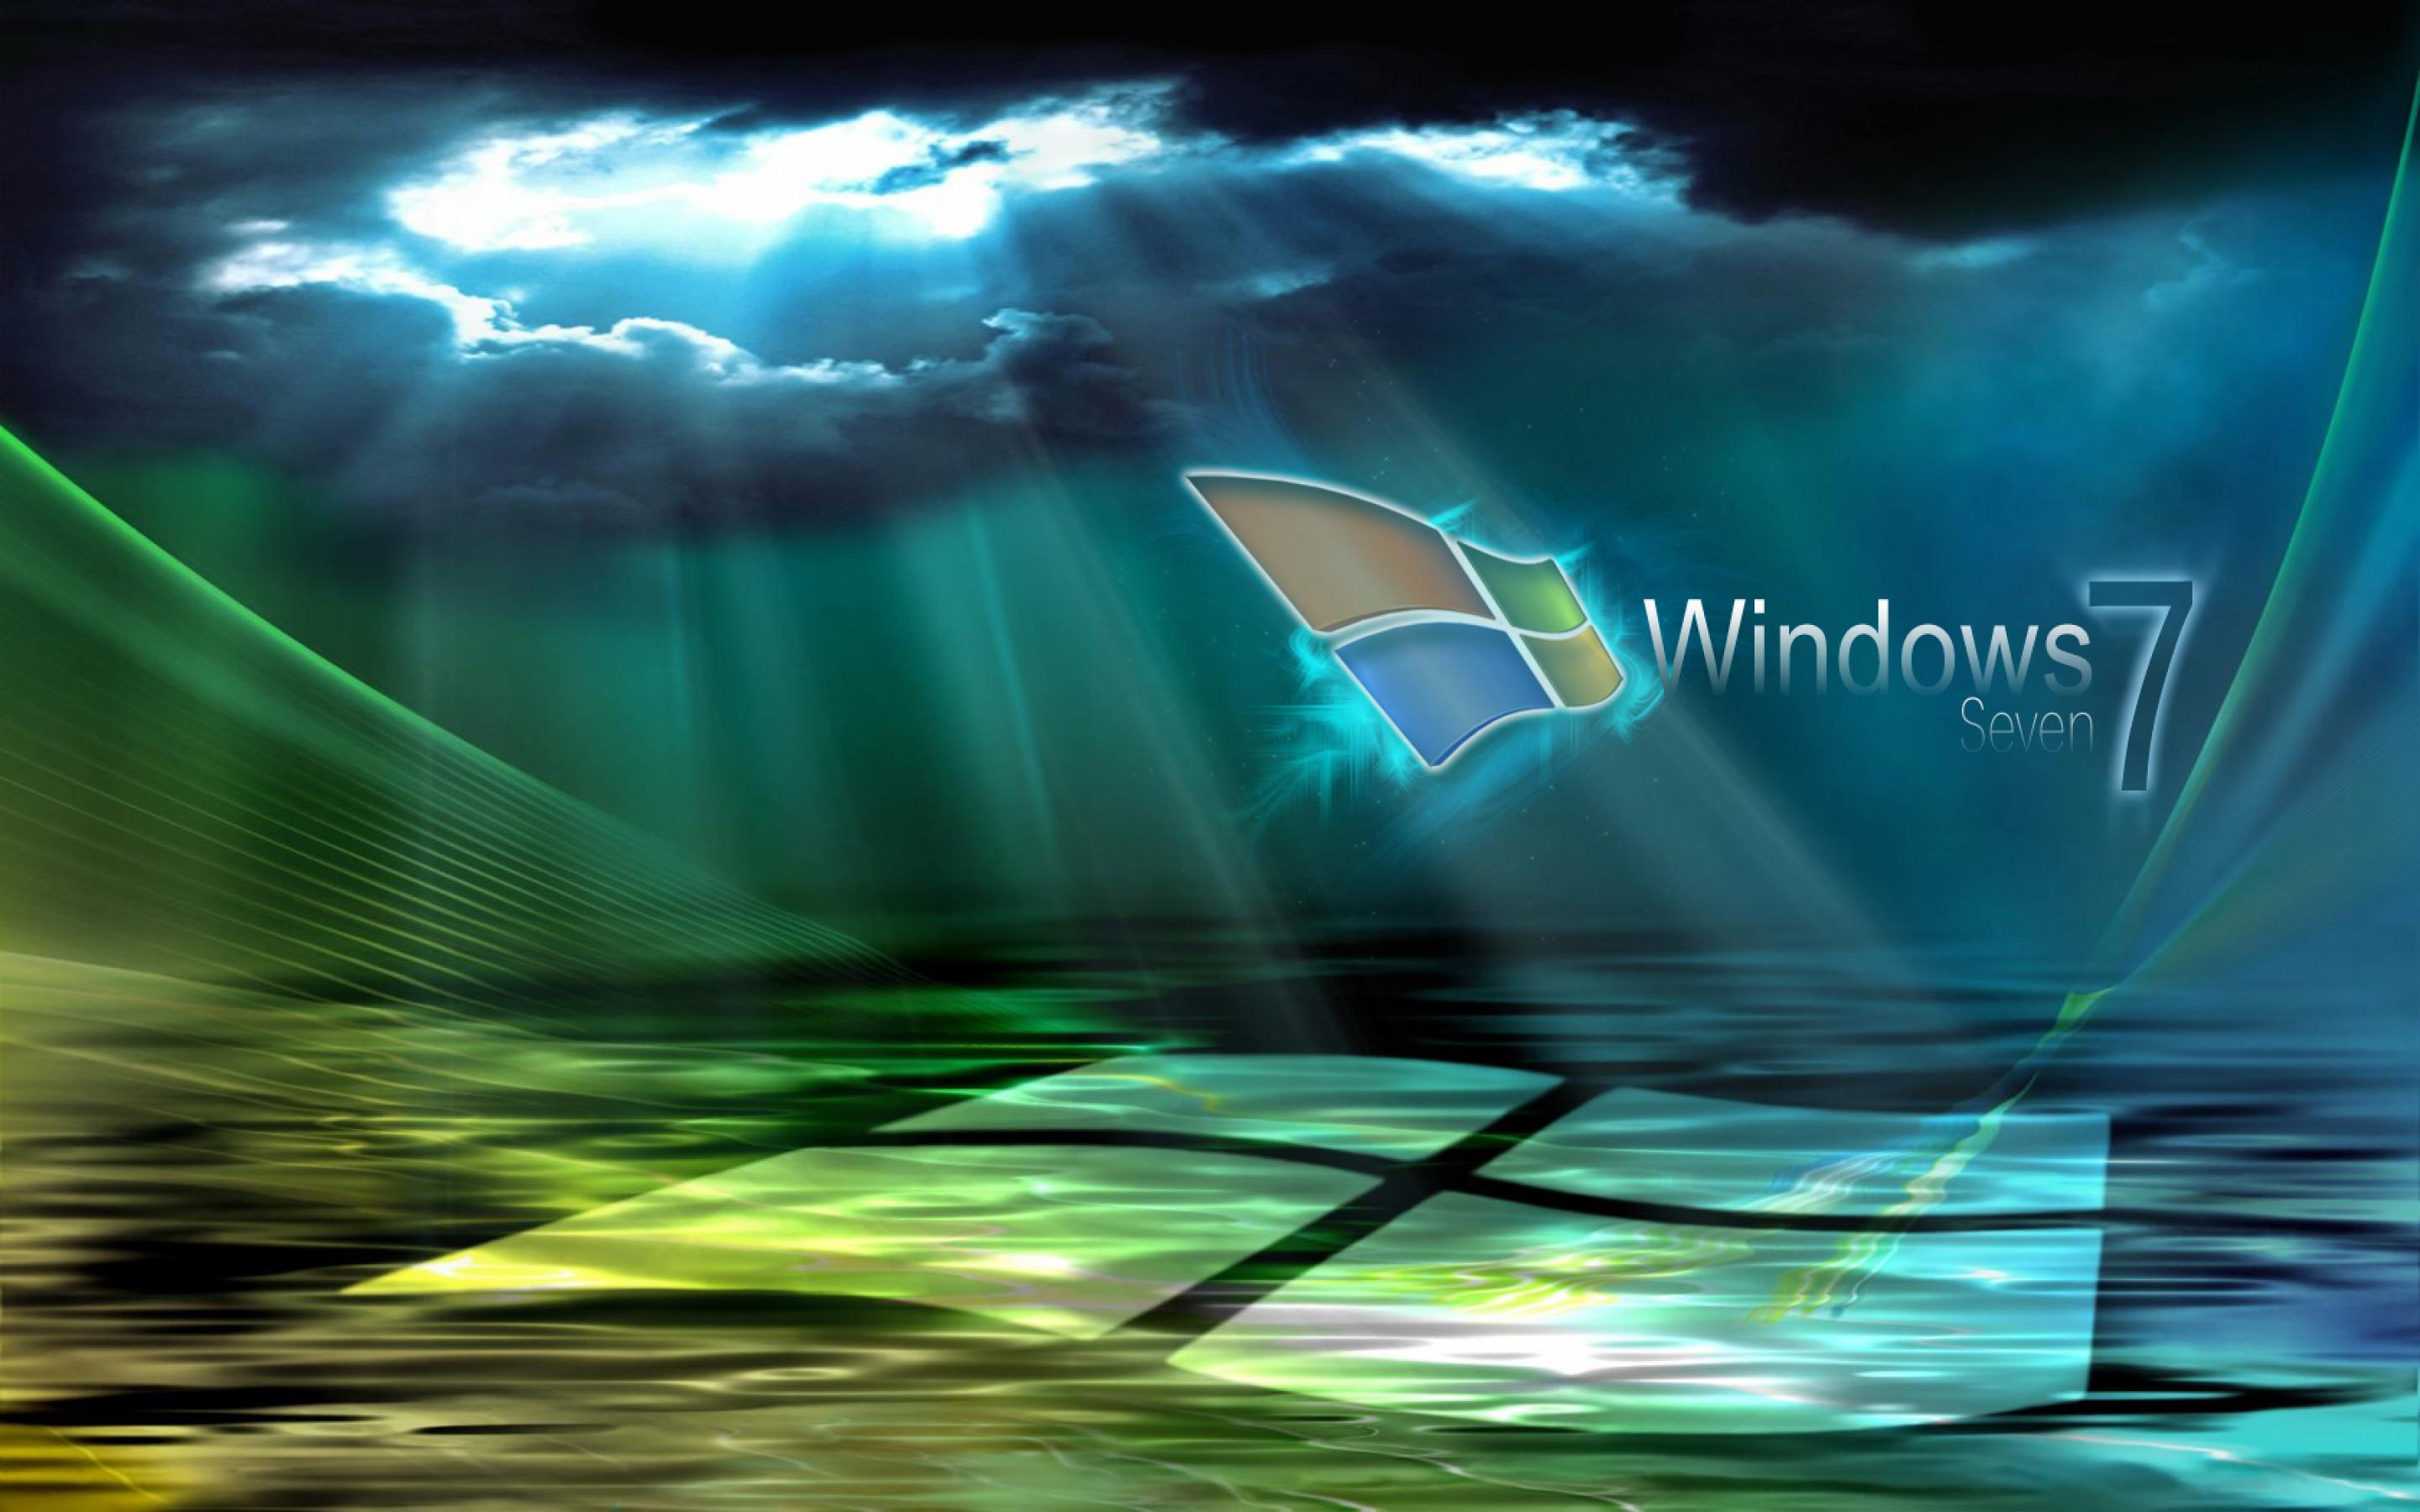 Windows 7 wallpapers by edition Inspired by Windows XP HomeProfessional  wallpapers  rwindows7